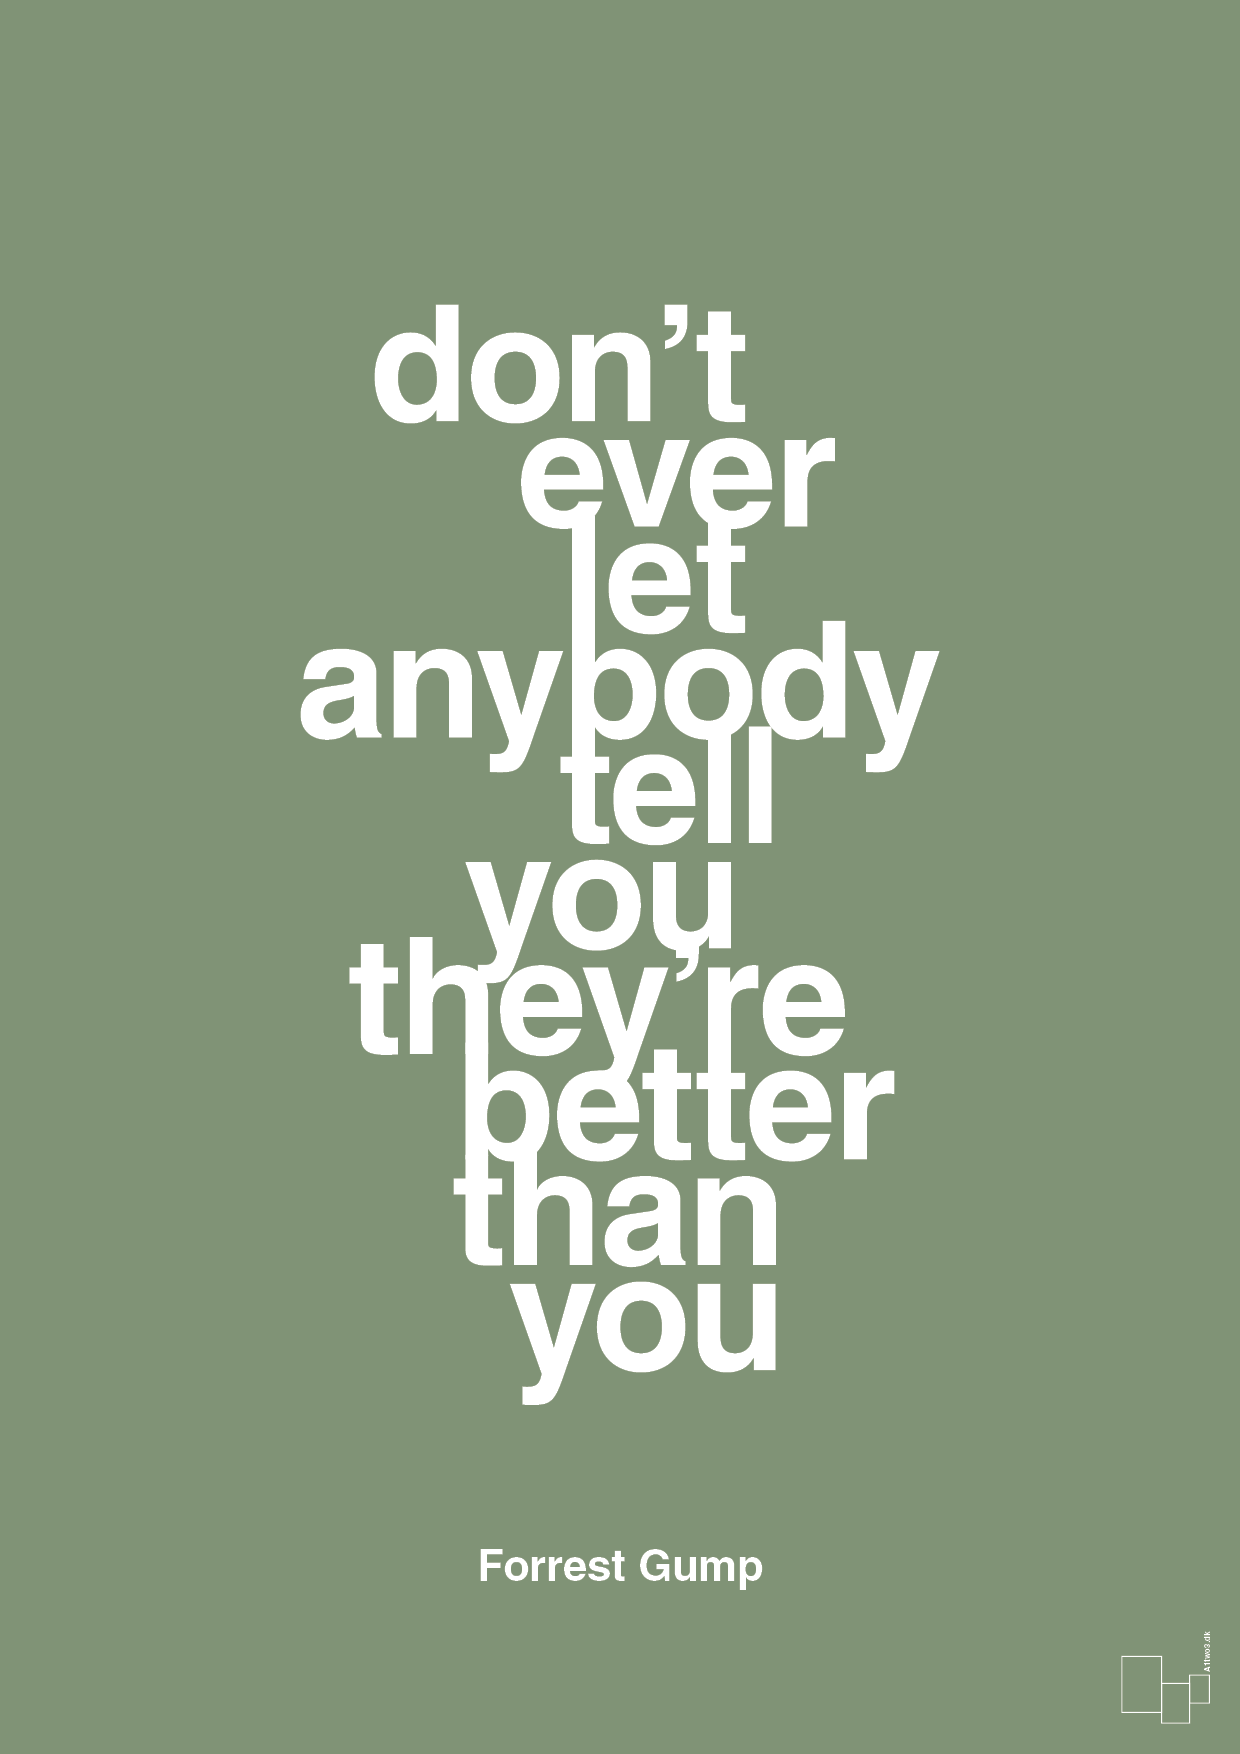 don’t ever let anybody tell you they’re better than you - Plakat med Citater i Jade